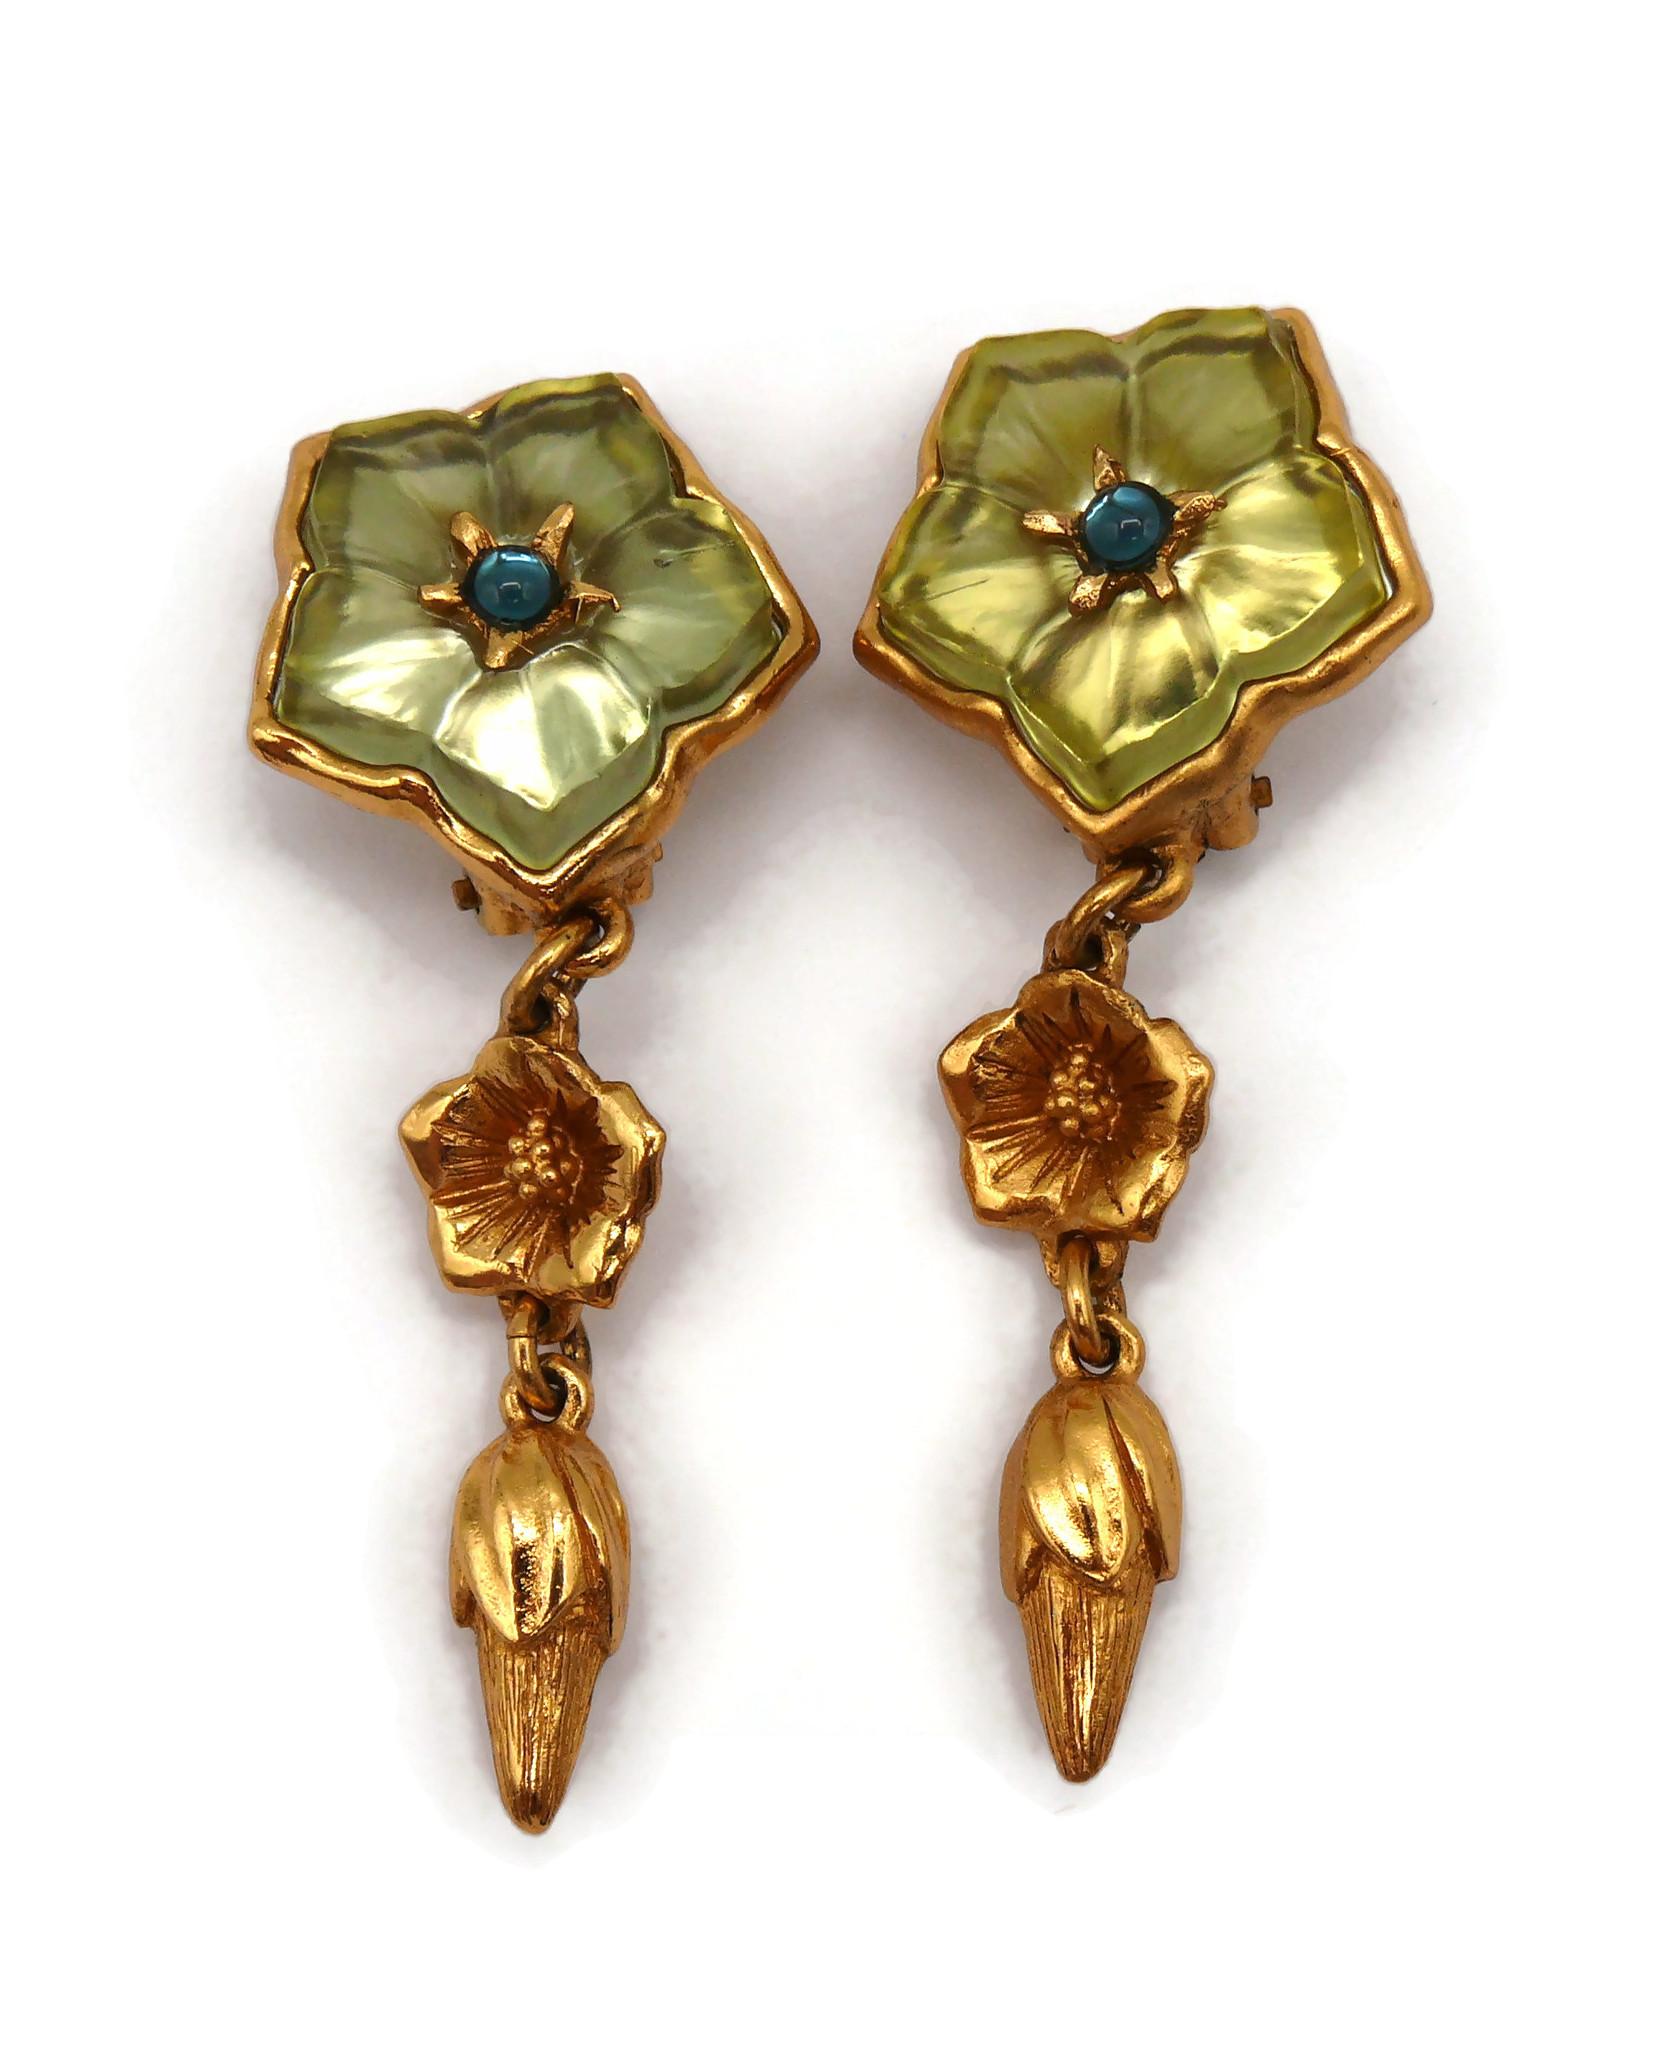 KENZO Vintage Gold Tone Resin Flower Dangling Earrings In Good Condition For Sale In Nice, FR